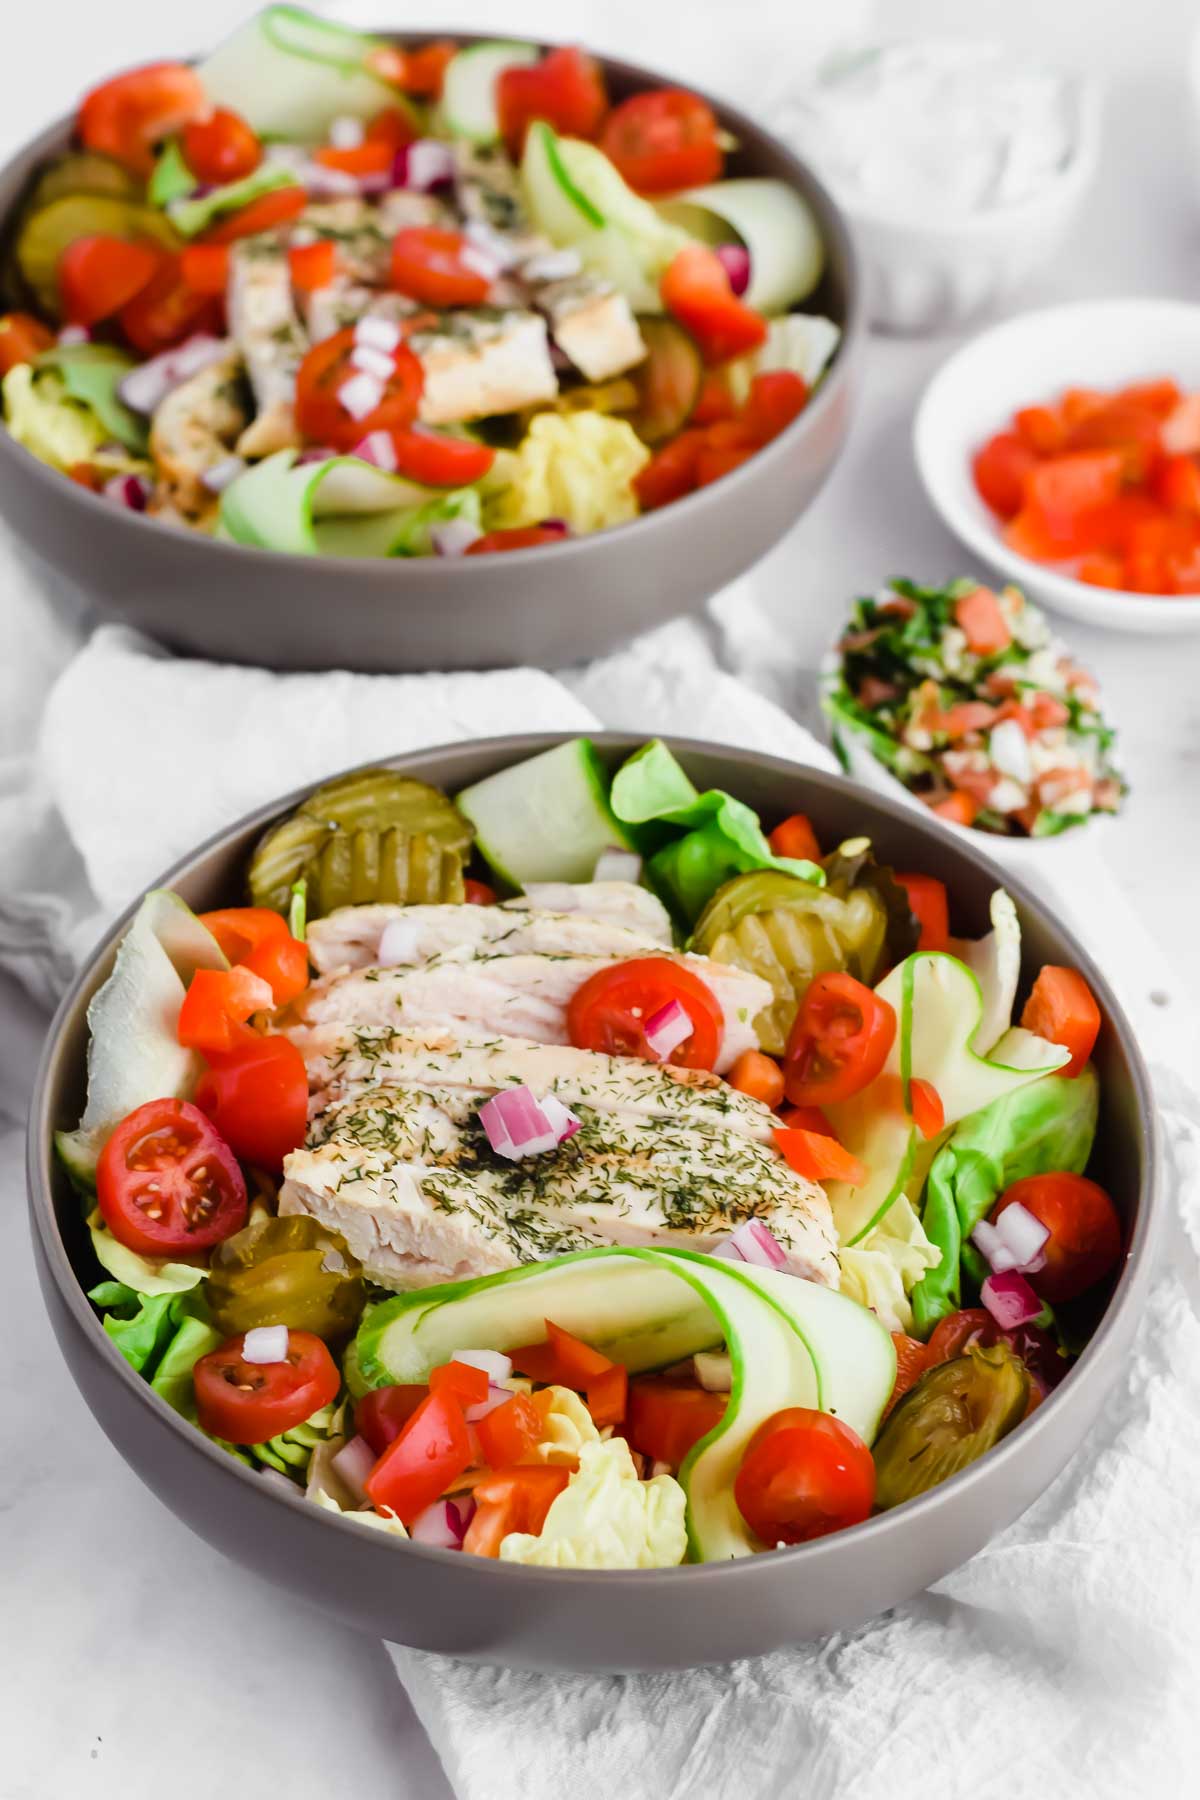 loaded Mediterranean salad with chicken, pita, tomatoes, red onions, and pickles.